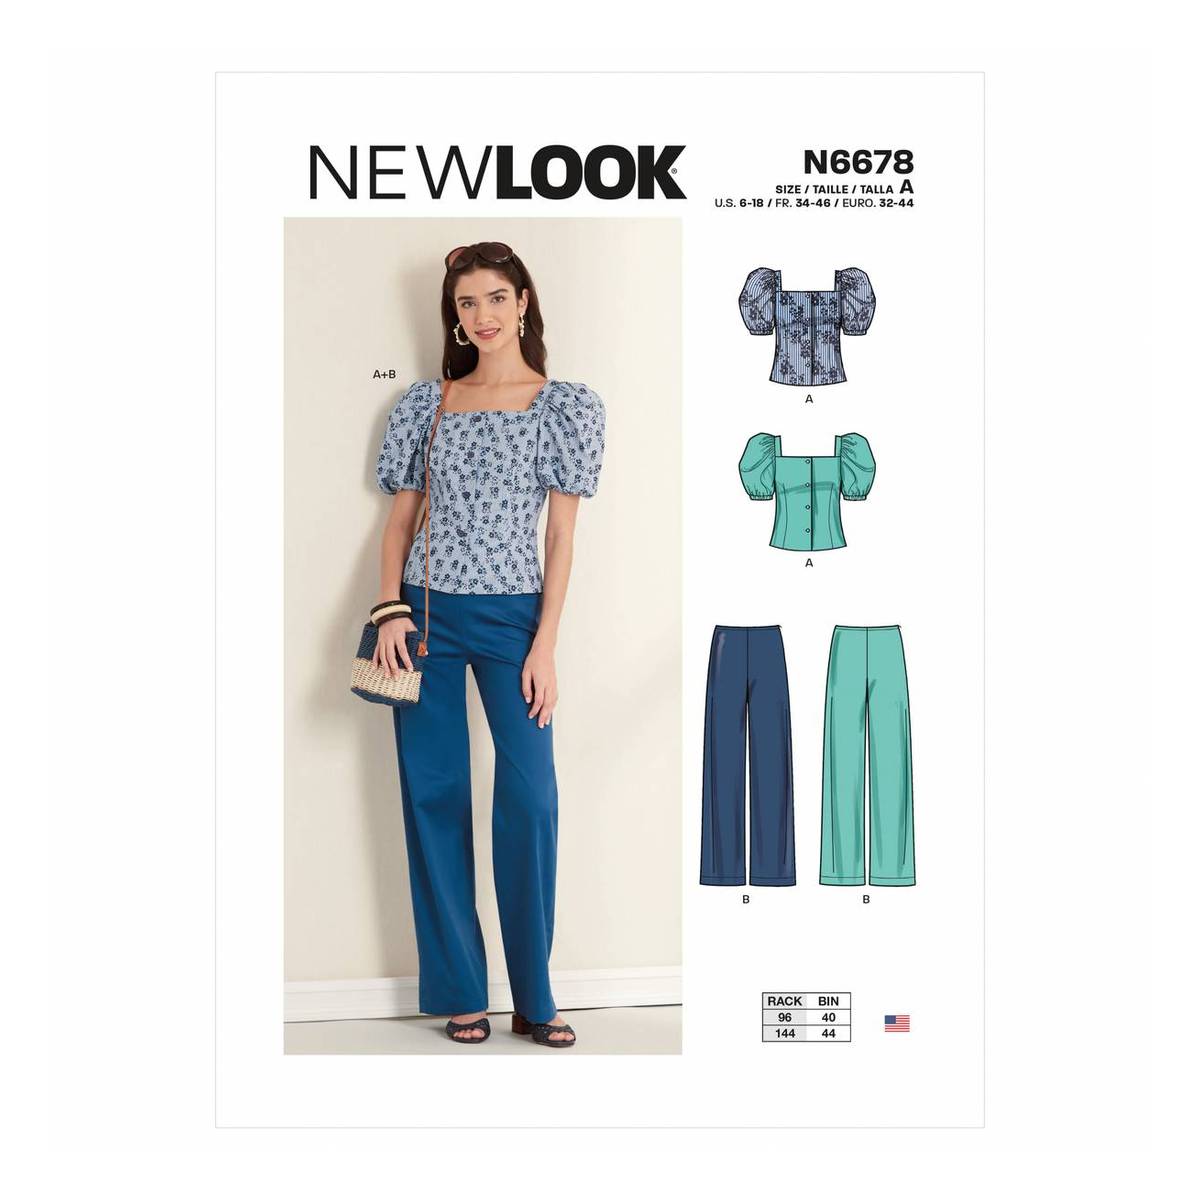 New Look Women's Top and Trousers Sewing Pattern N6678 | Hobbycraft